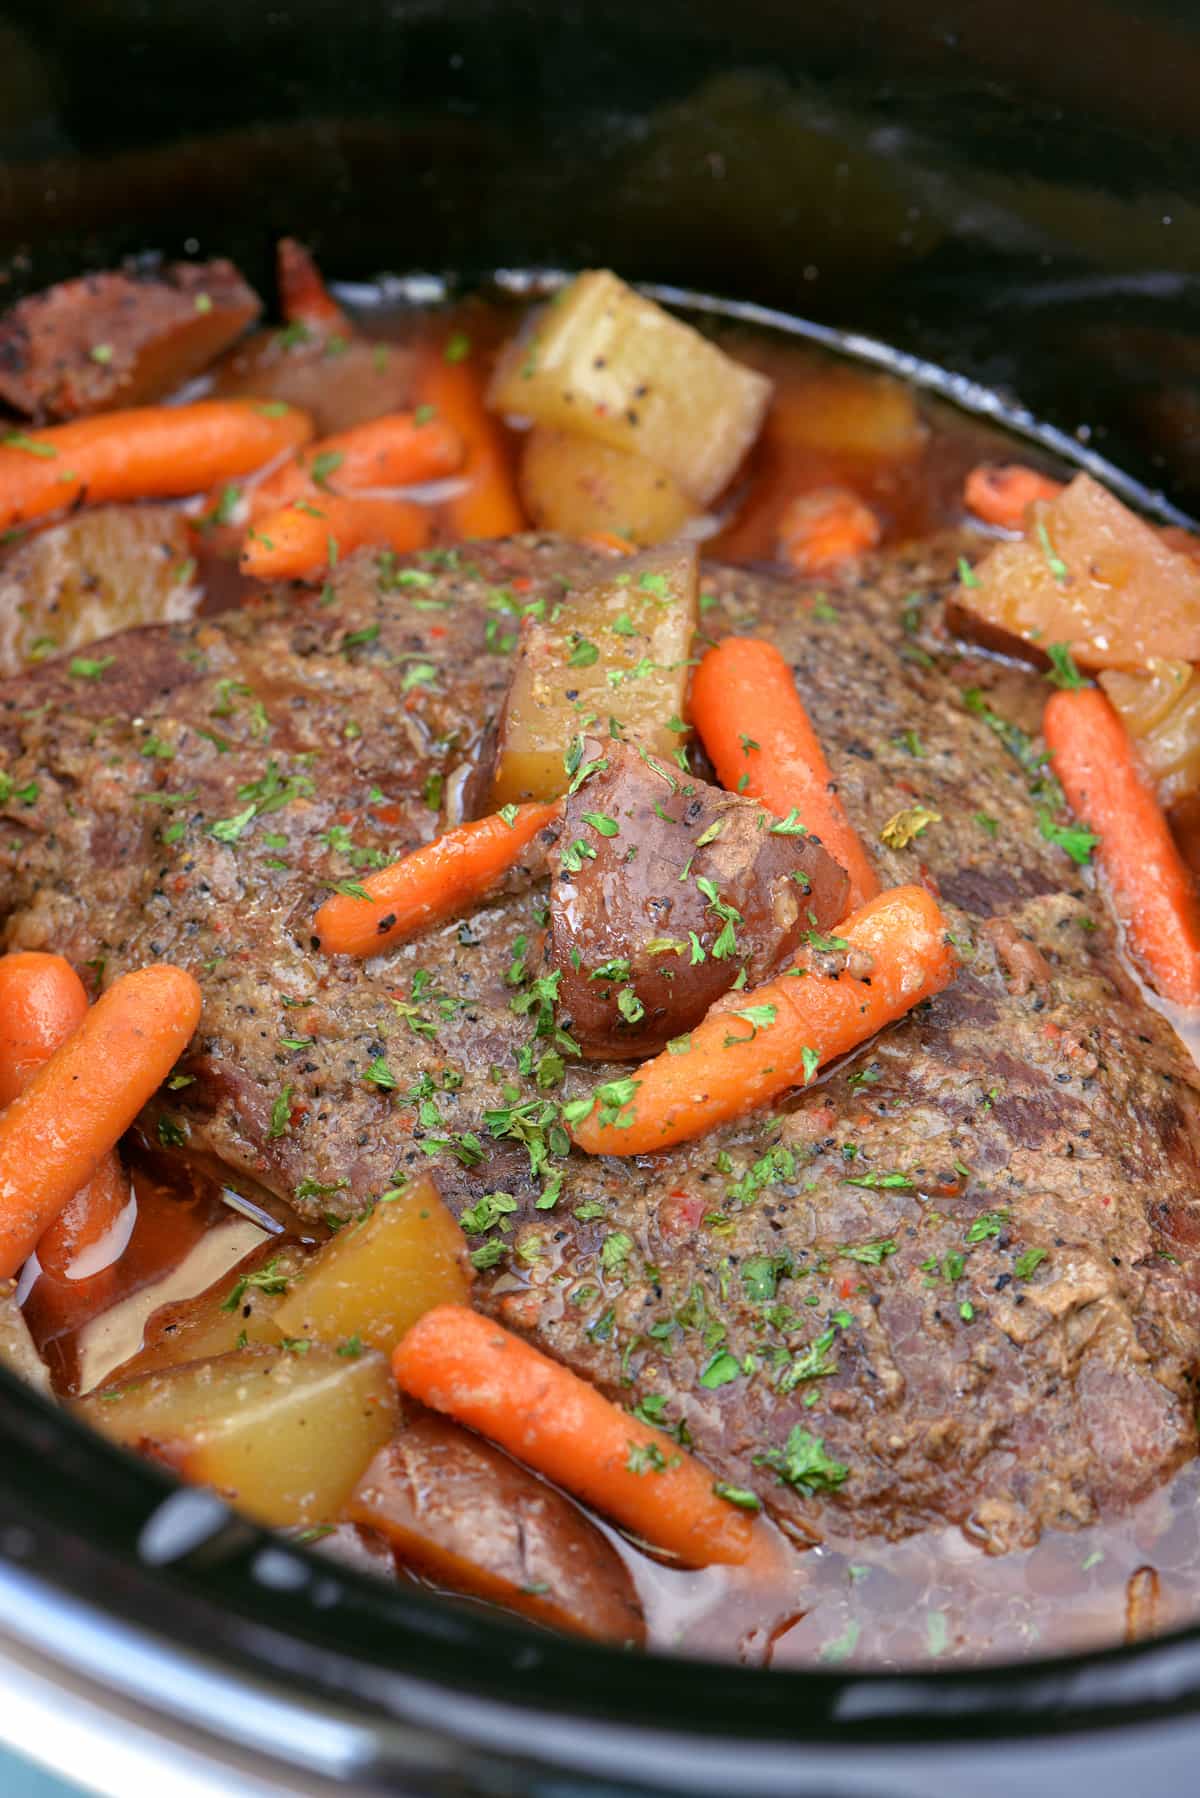 Slow Cooker Pot Roast with Video - The Gunny Sack